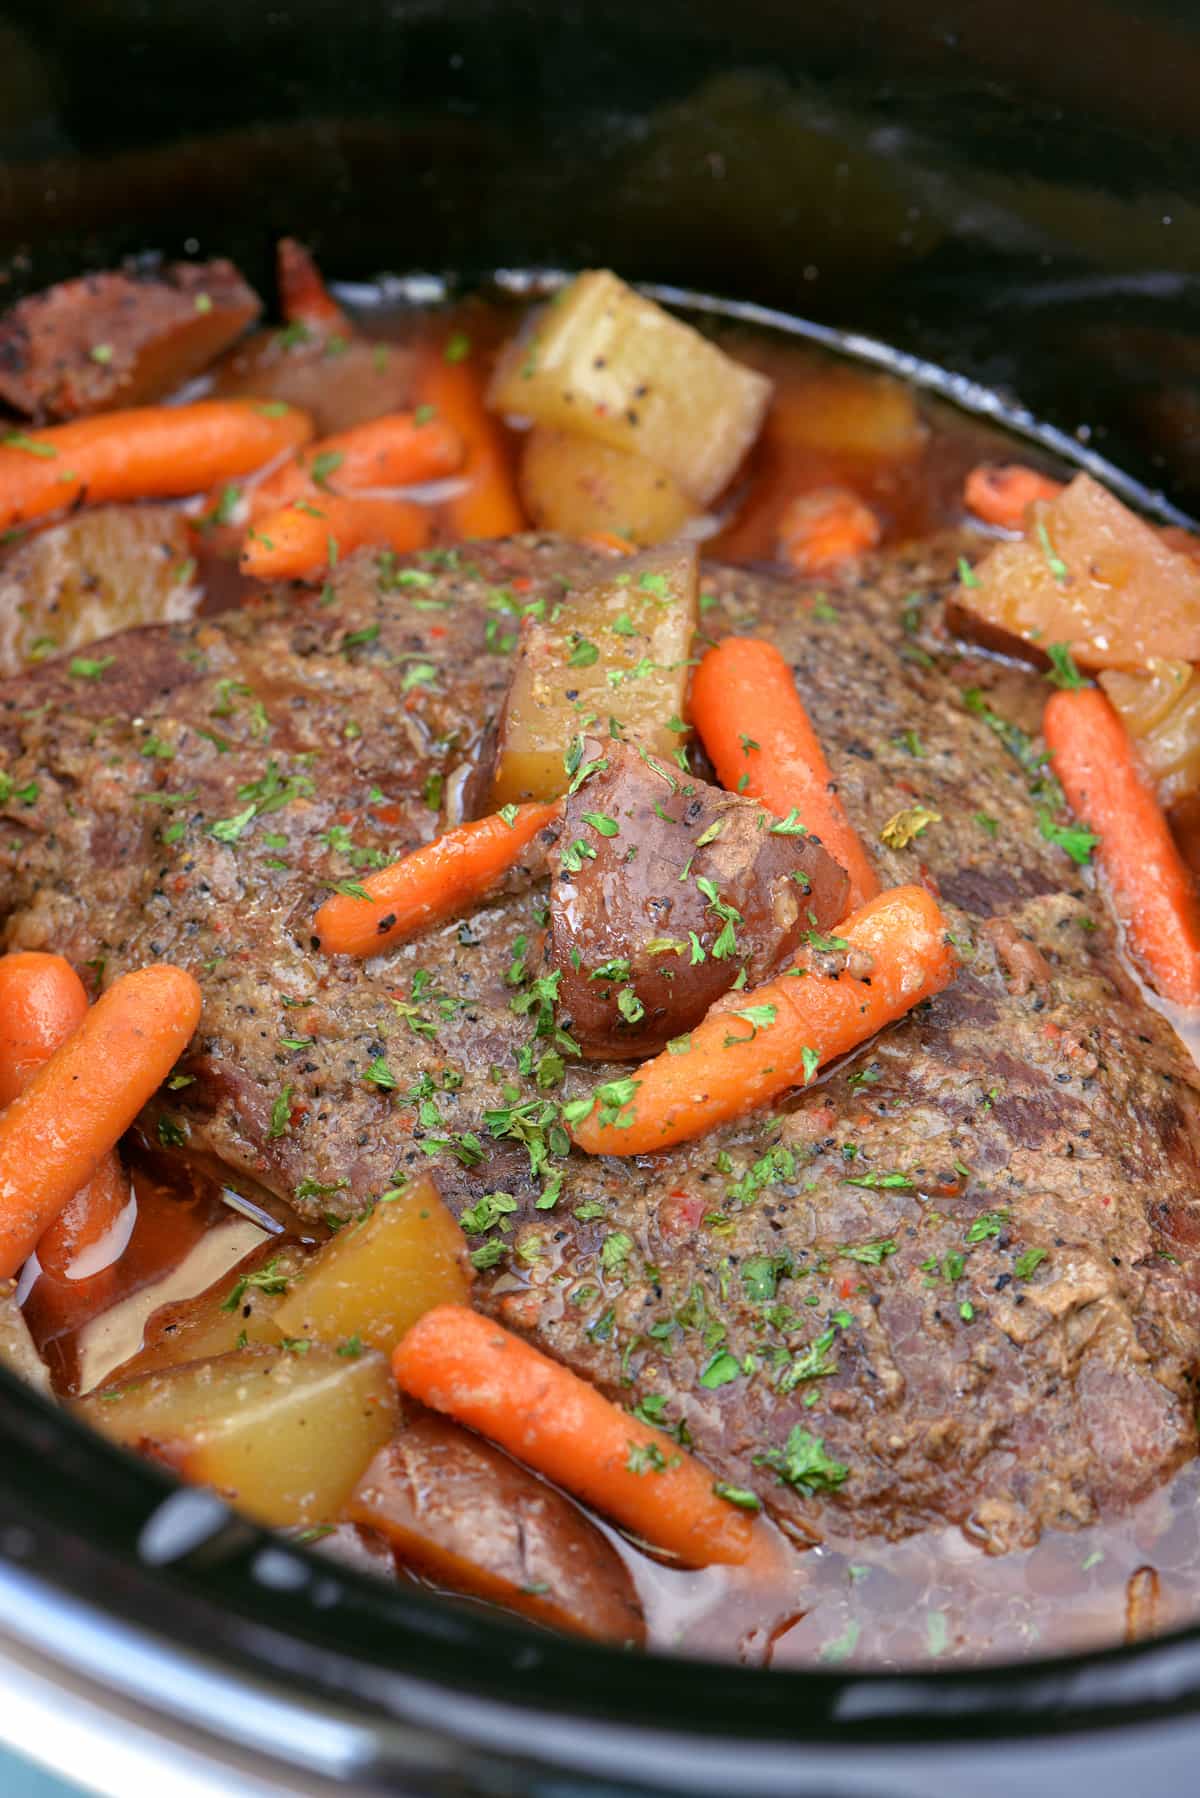 Slow Cooker Pot Roast with Video - The Gunny Sack